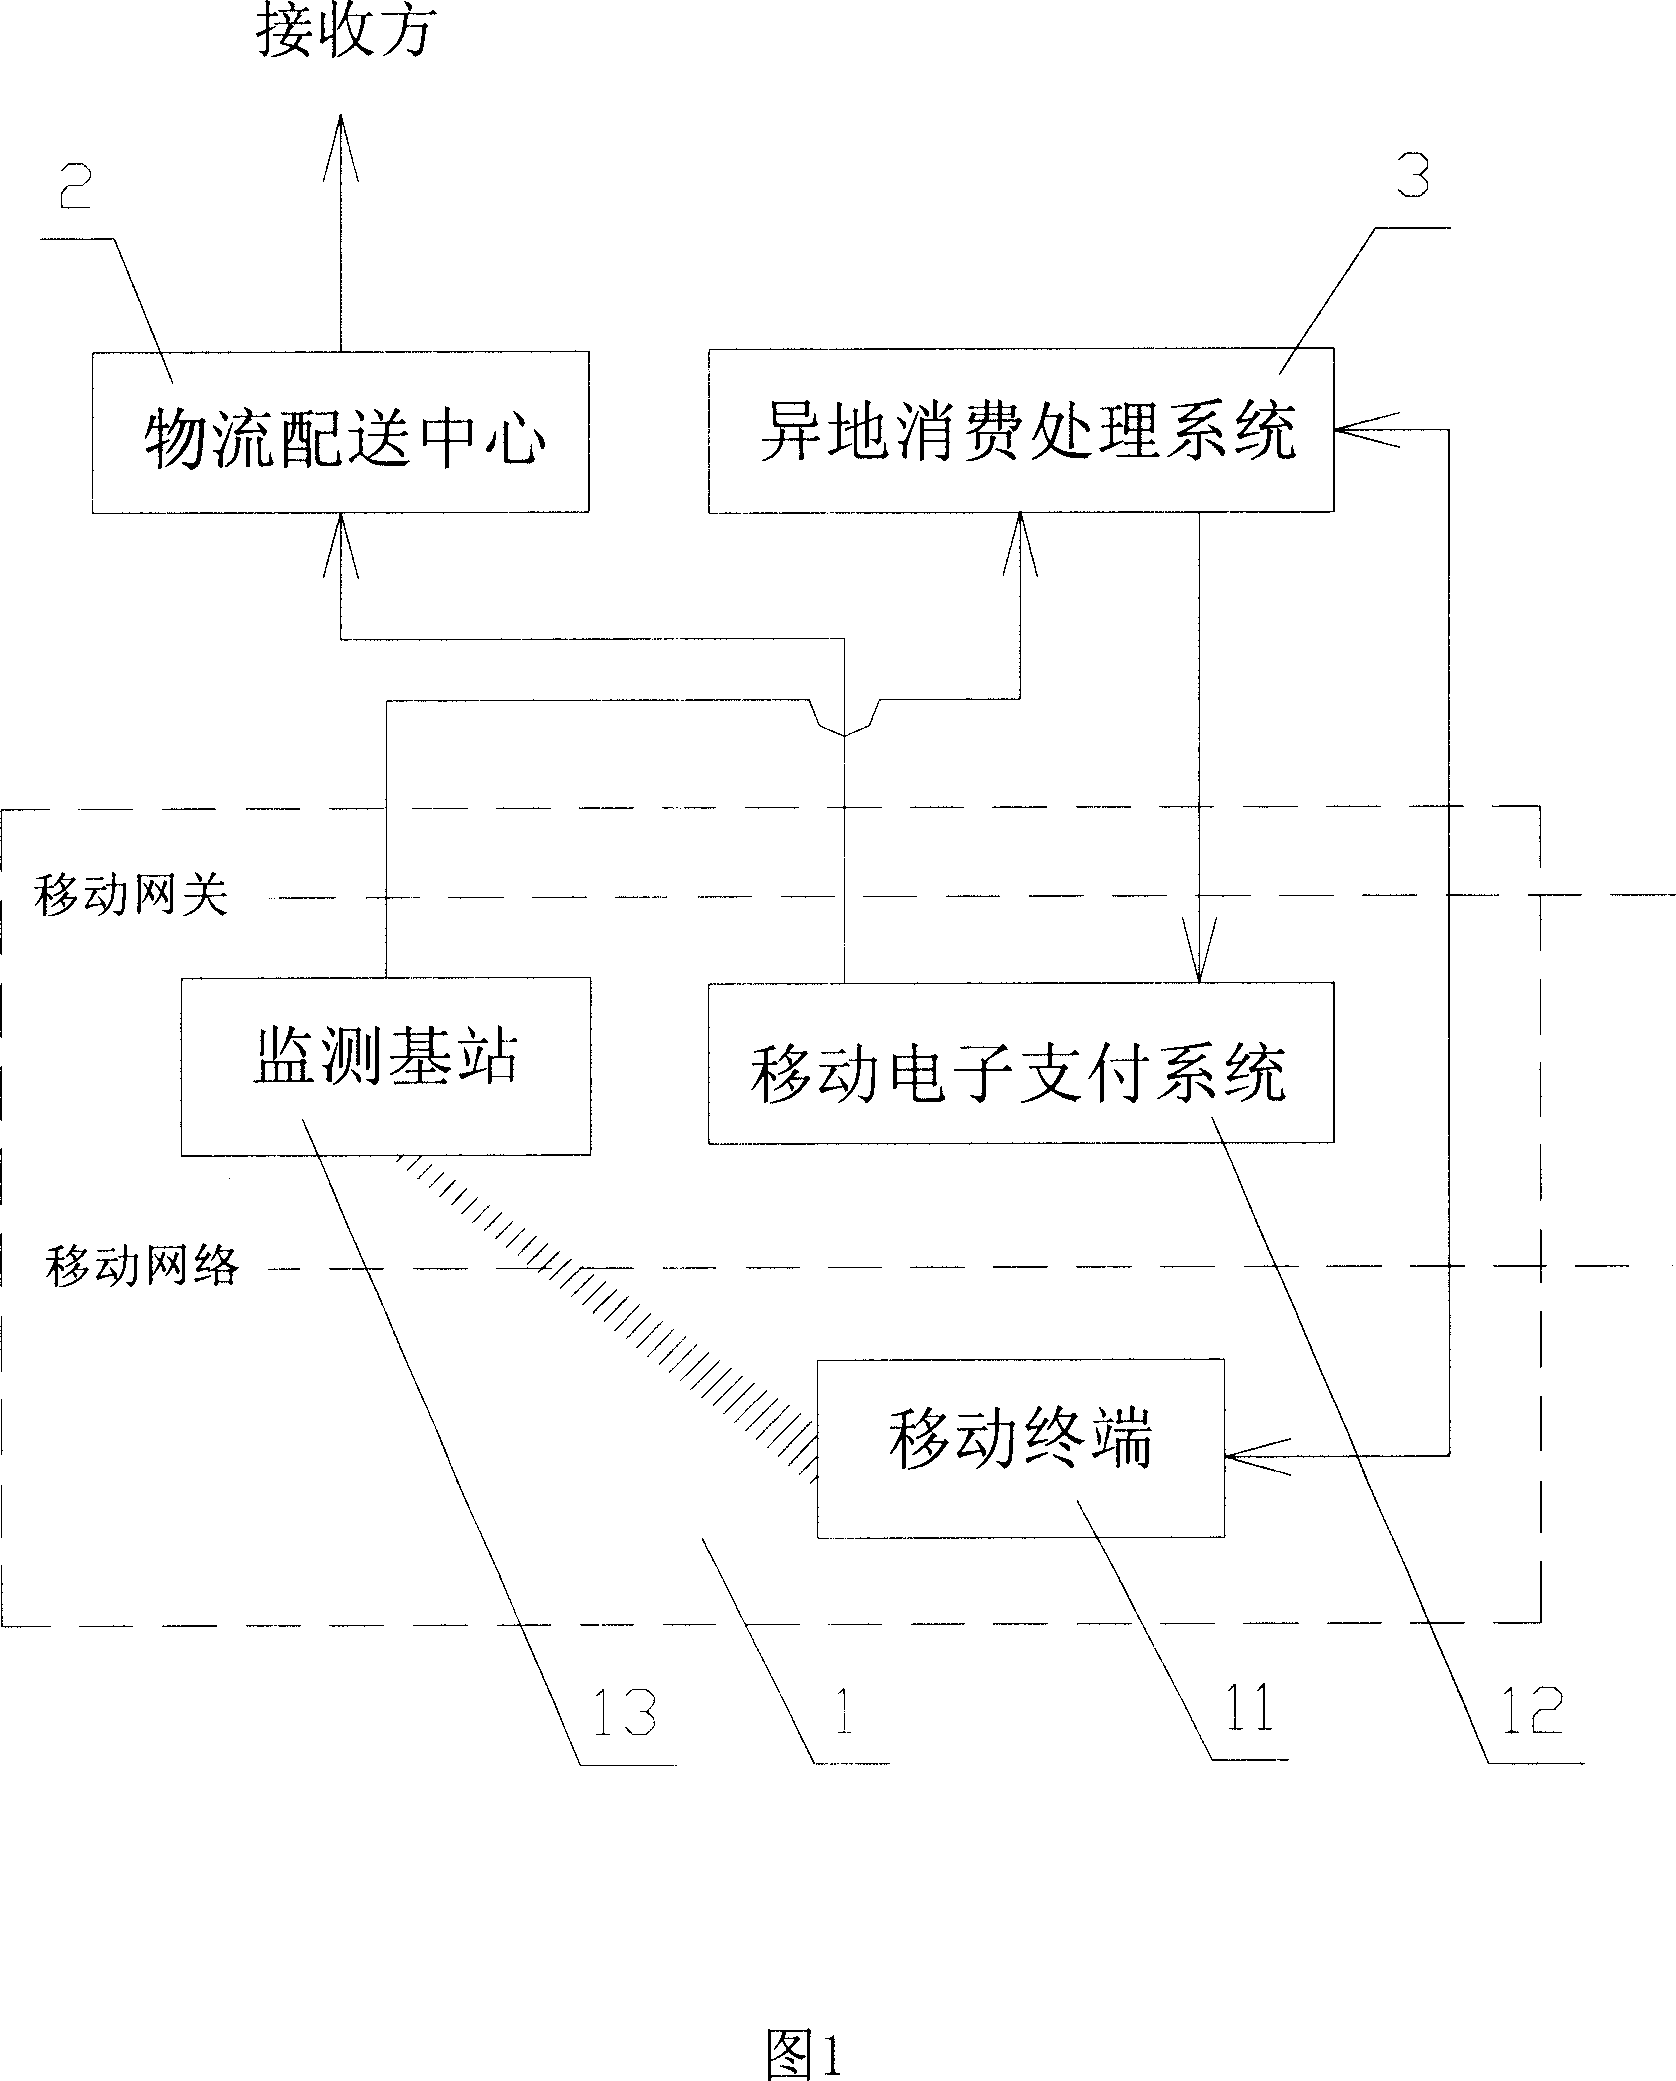 Long-distance consuming method and system by mobile system